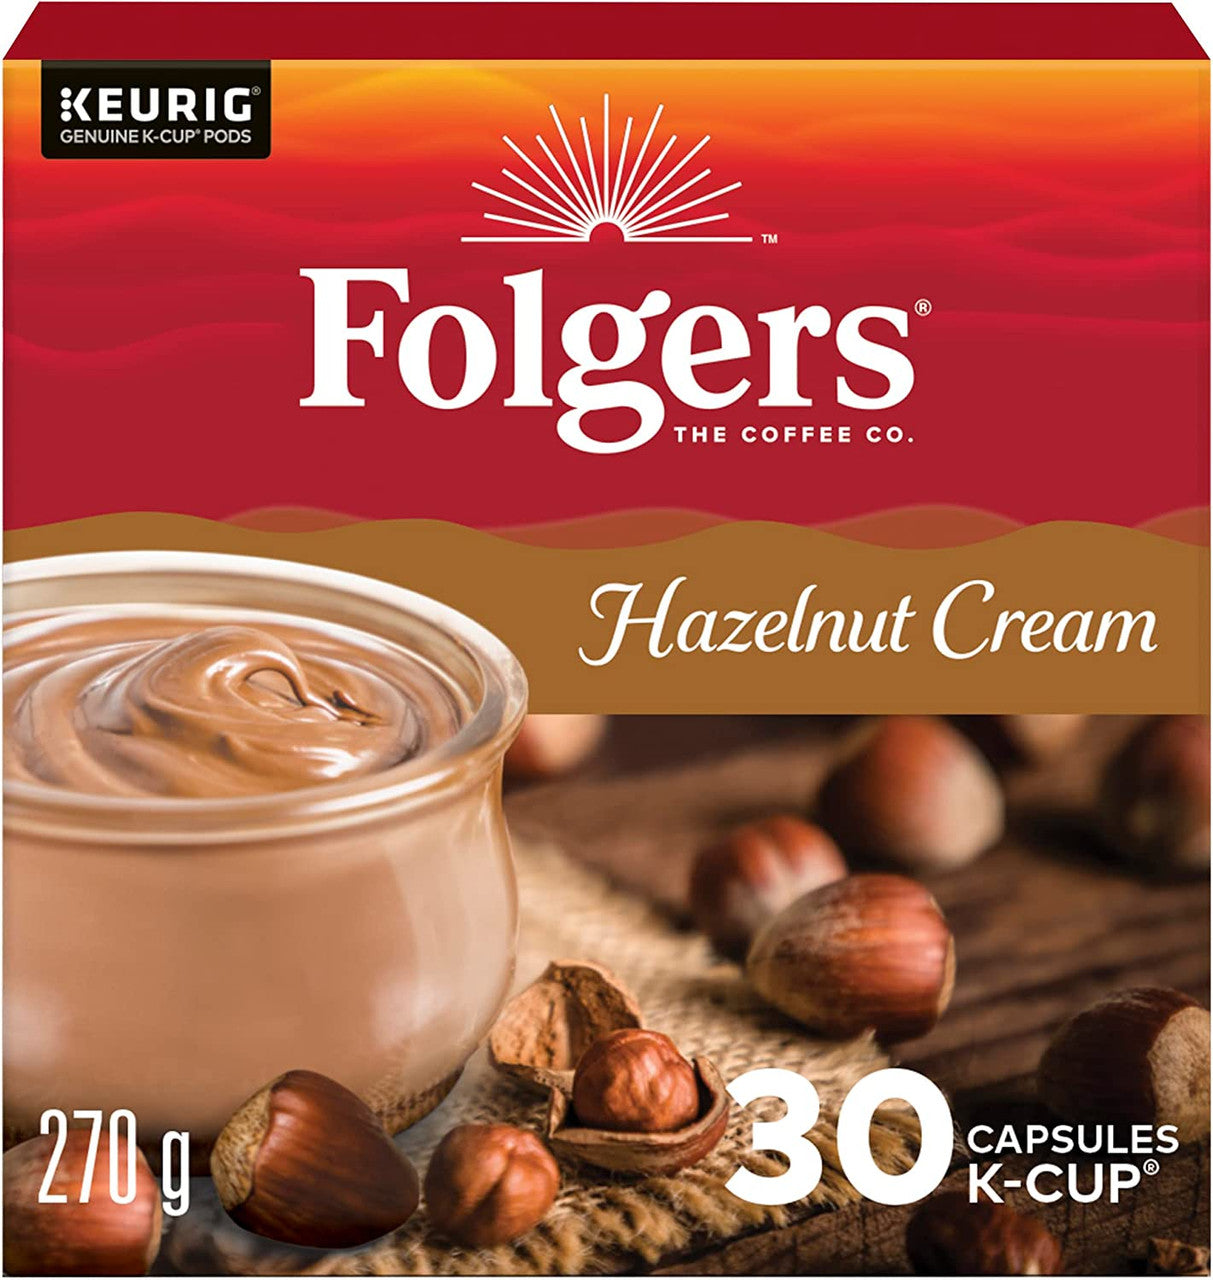 Folgers Hazelnut Cream Coffee K-cups, 30 Count, 270g/9.5 oz. Box {Imported from Canada}